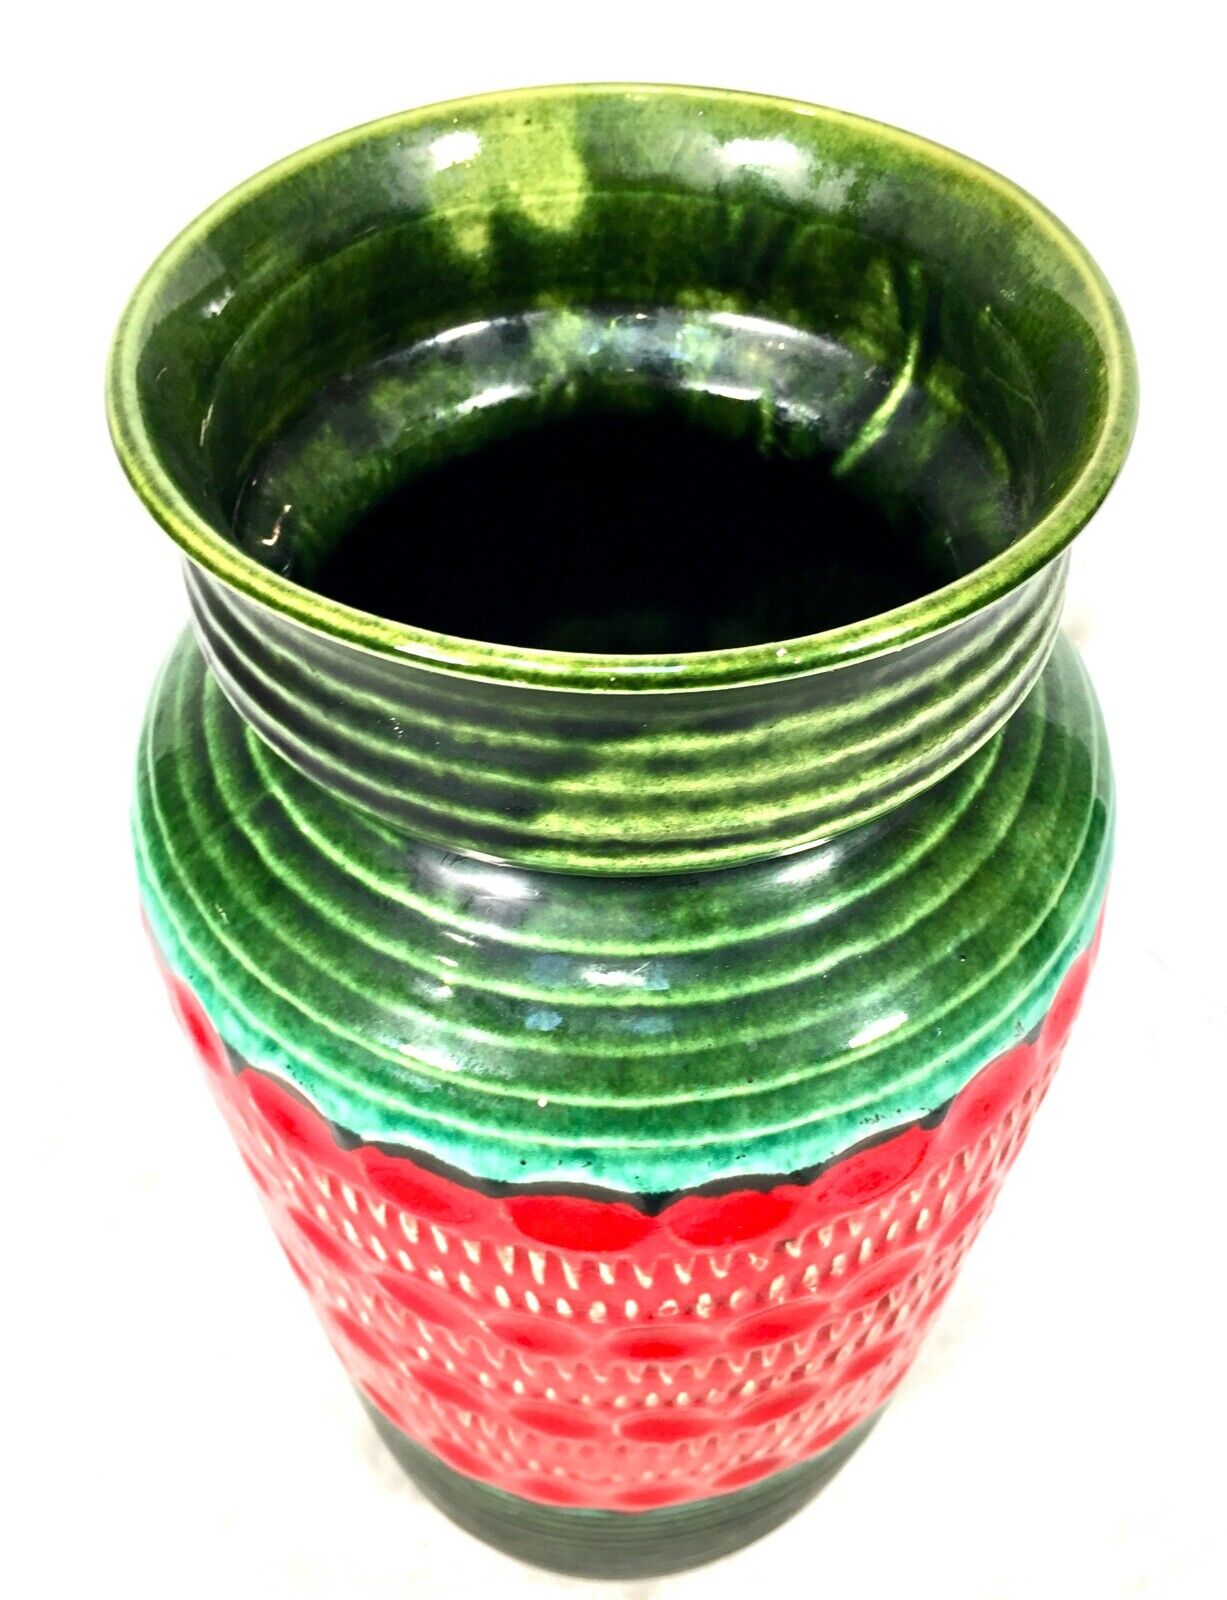 Vintage Large Sized West German Pottery Bay Vase / Red & Green / Retro 1970s